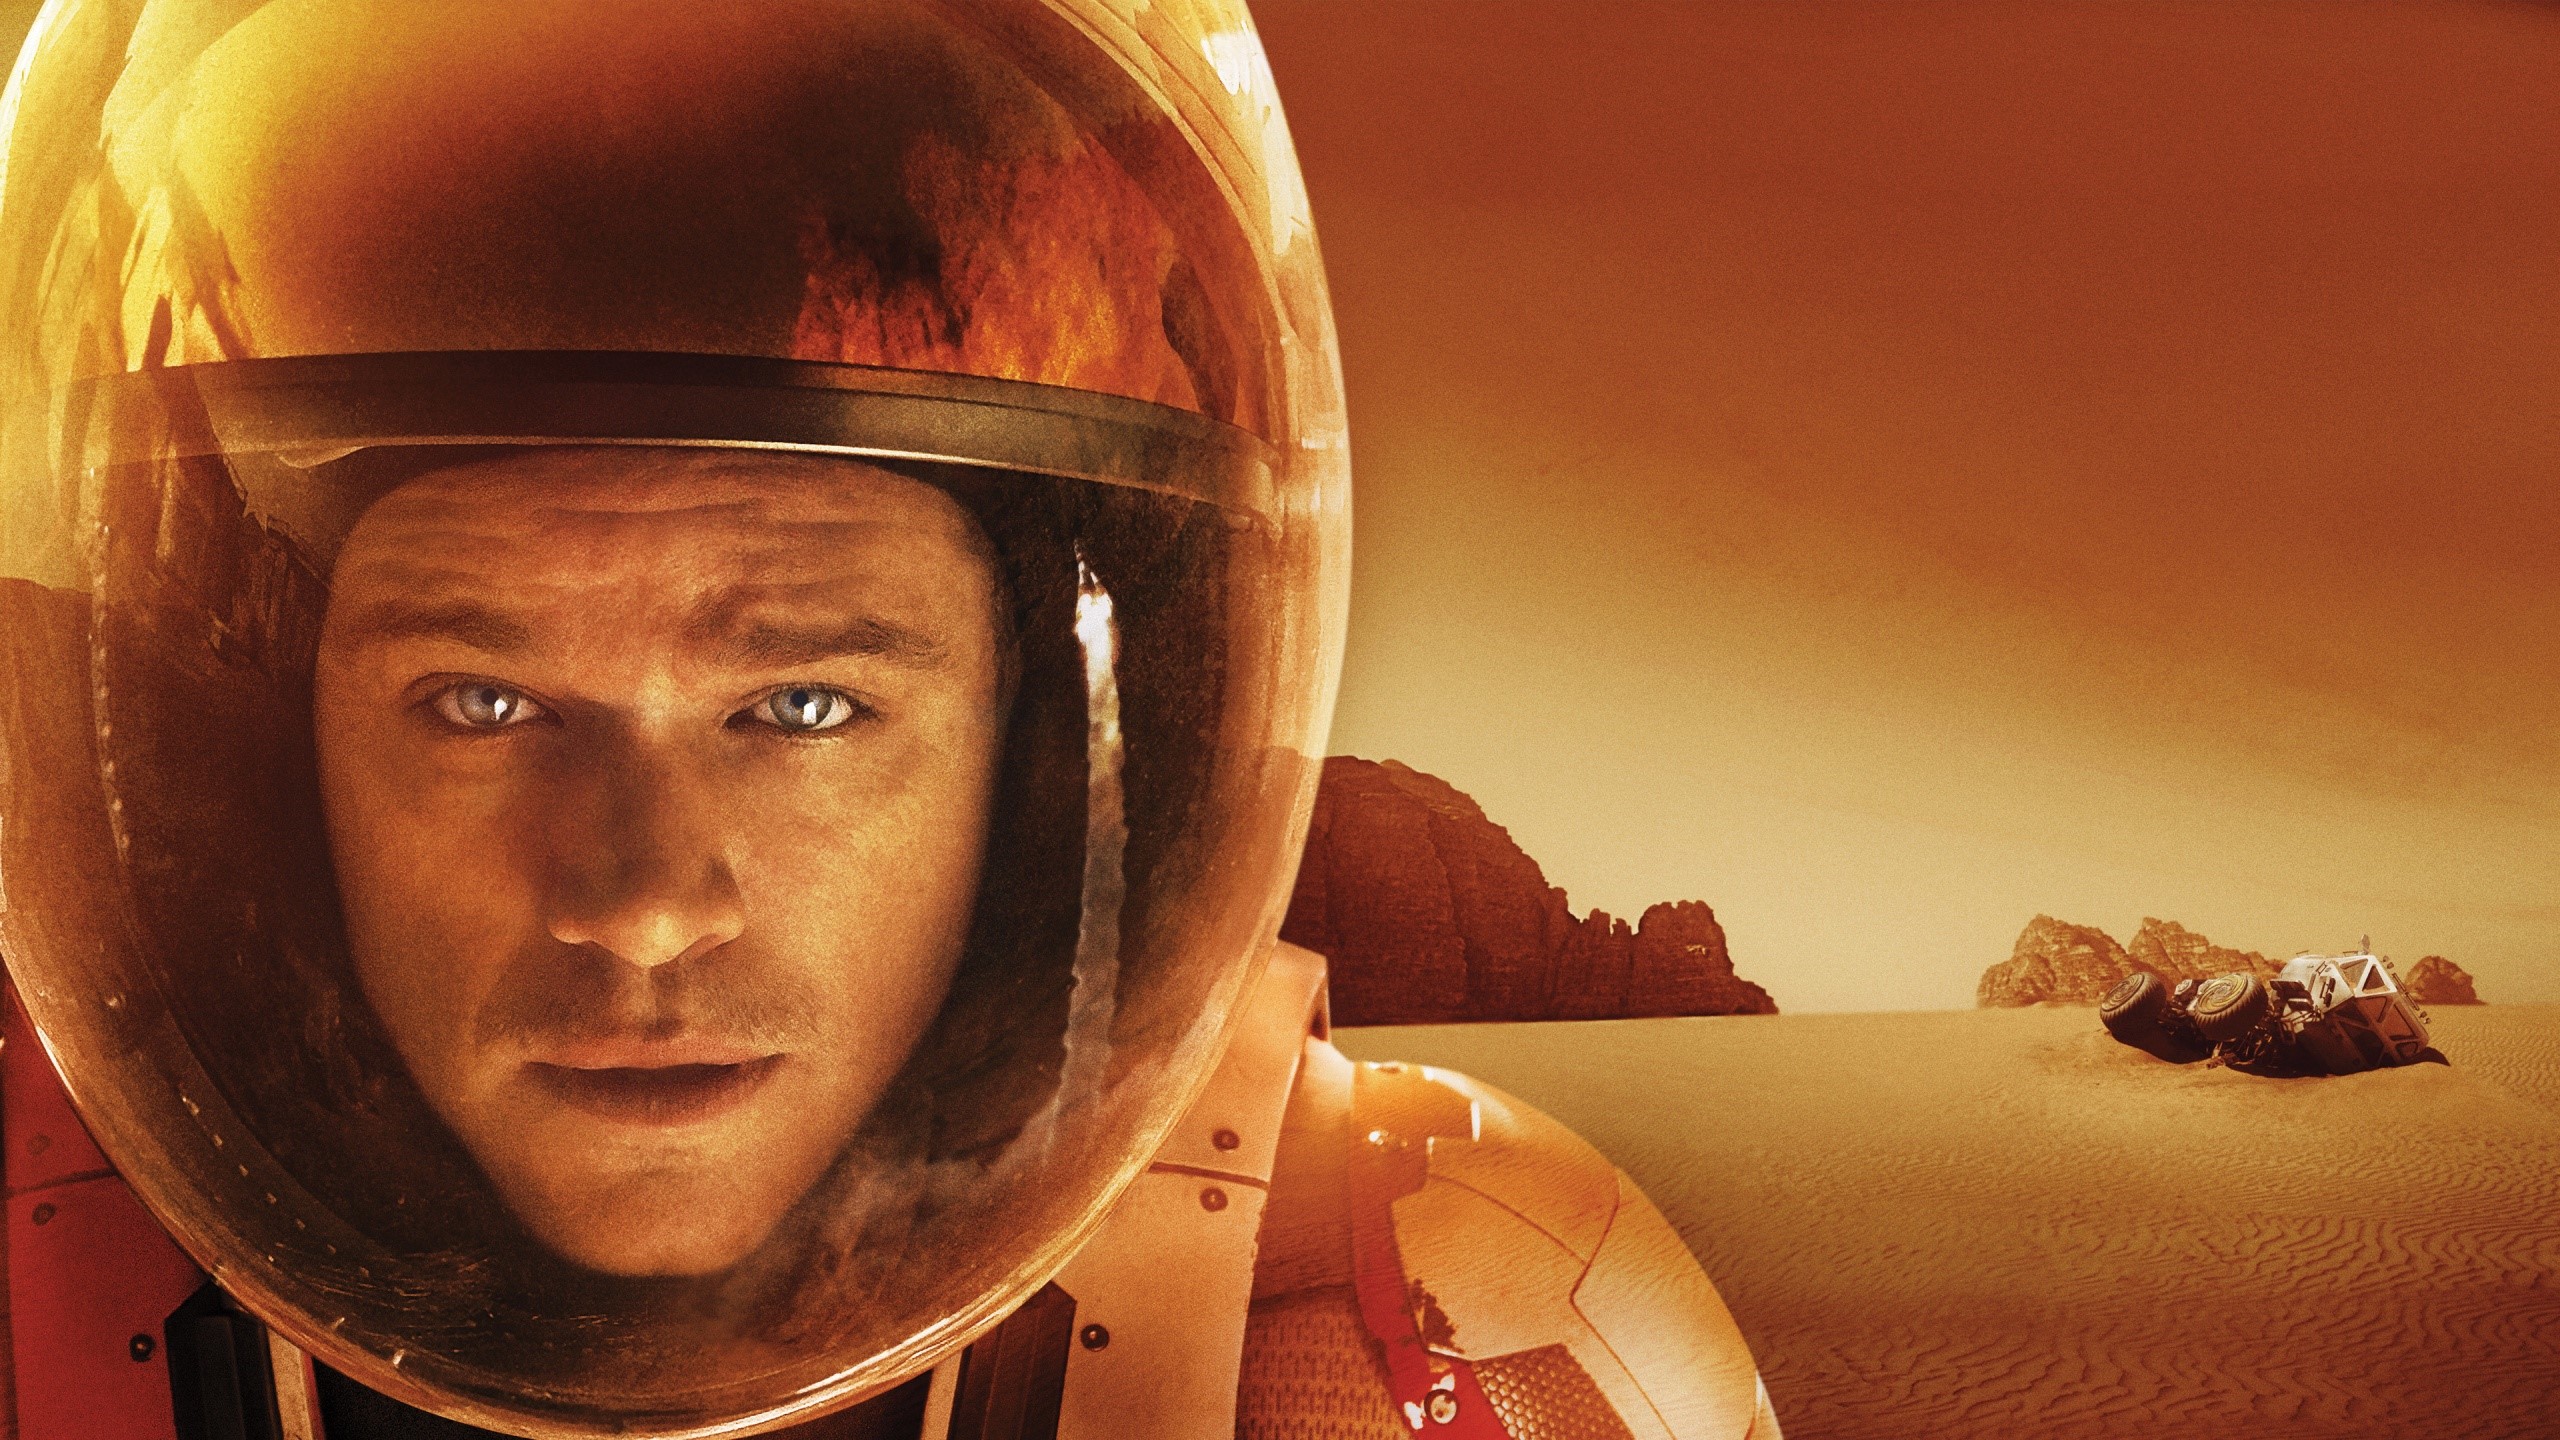 Wallpaper Movie The Martian by Ridley Scooy